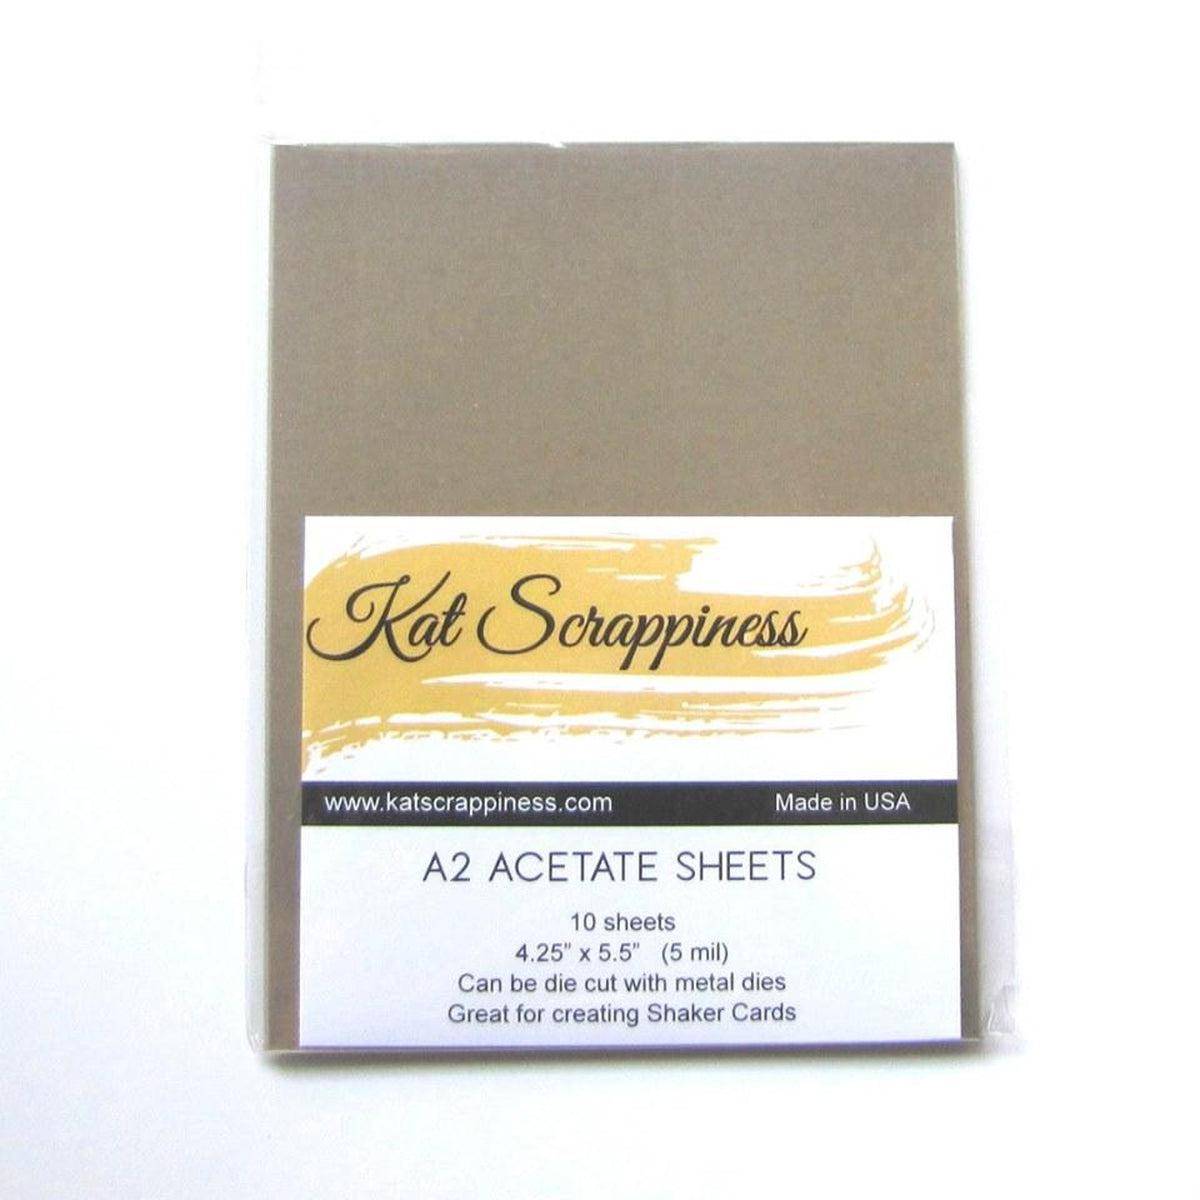 A2 Acetate Sheets by Kat Scrappiness - 10pc - Kat Scrappiness